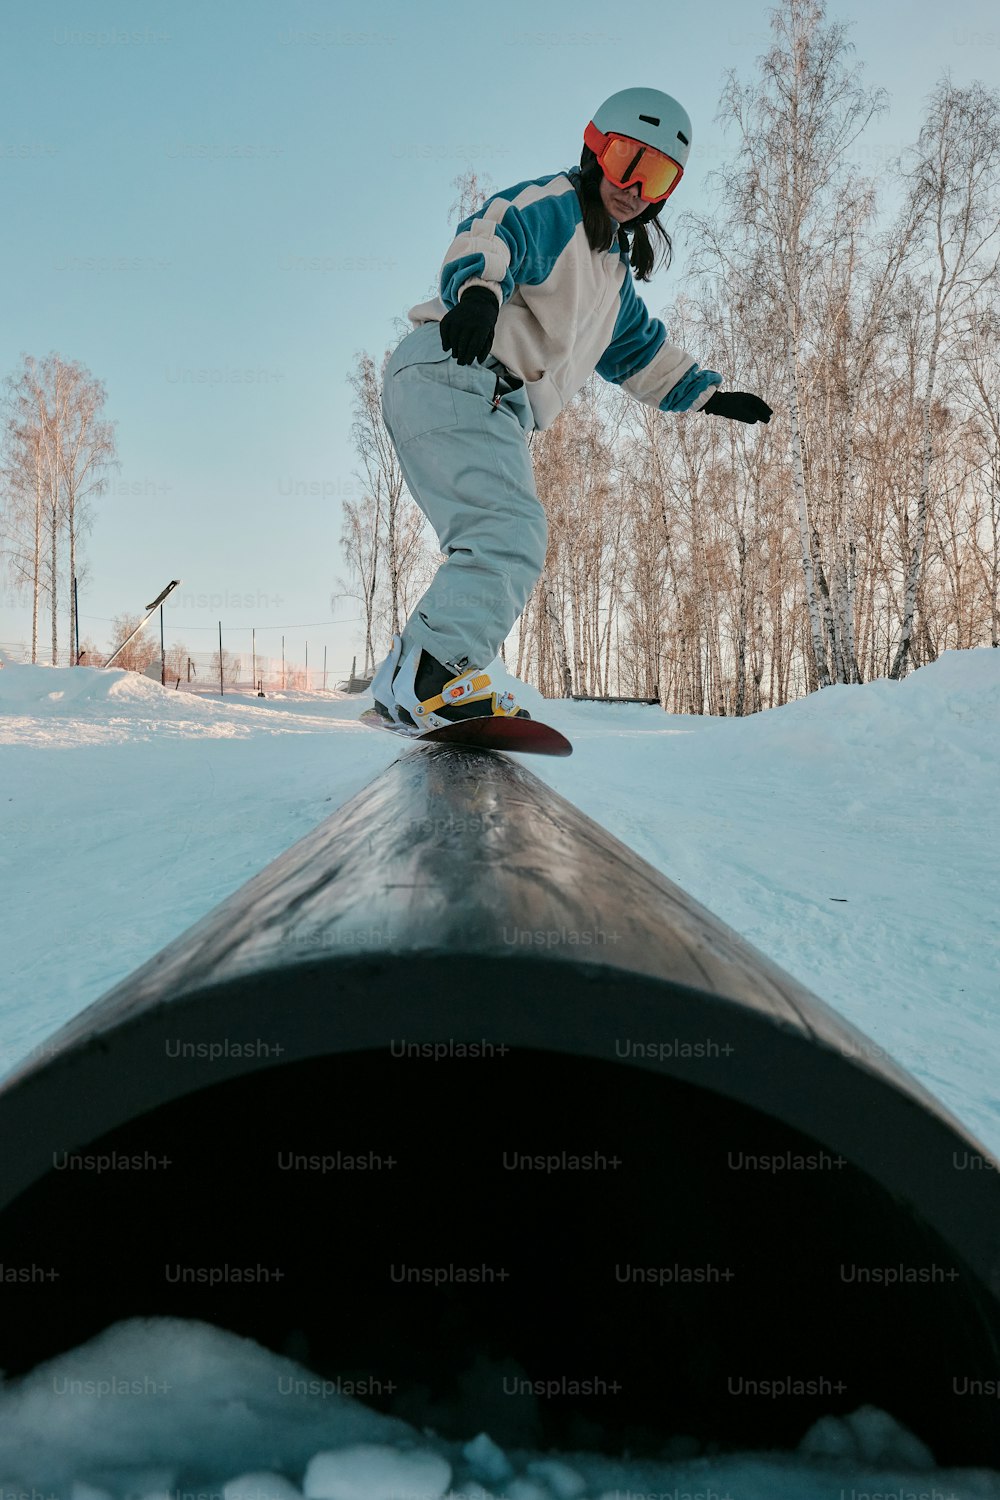 a man riding a snowboard down the side of a pipe